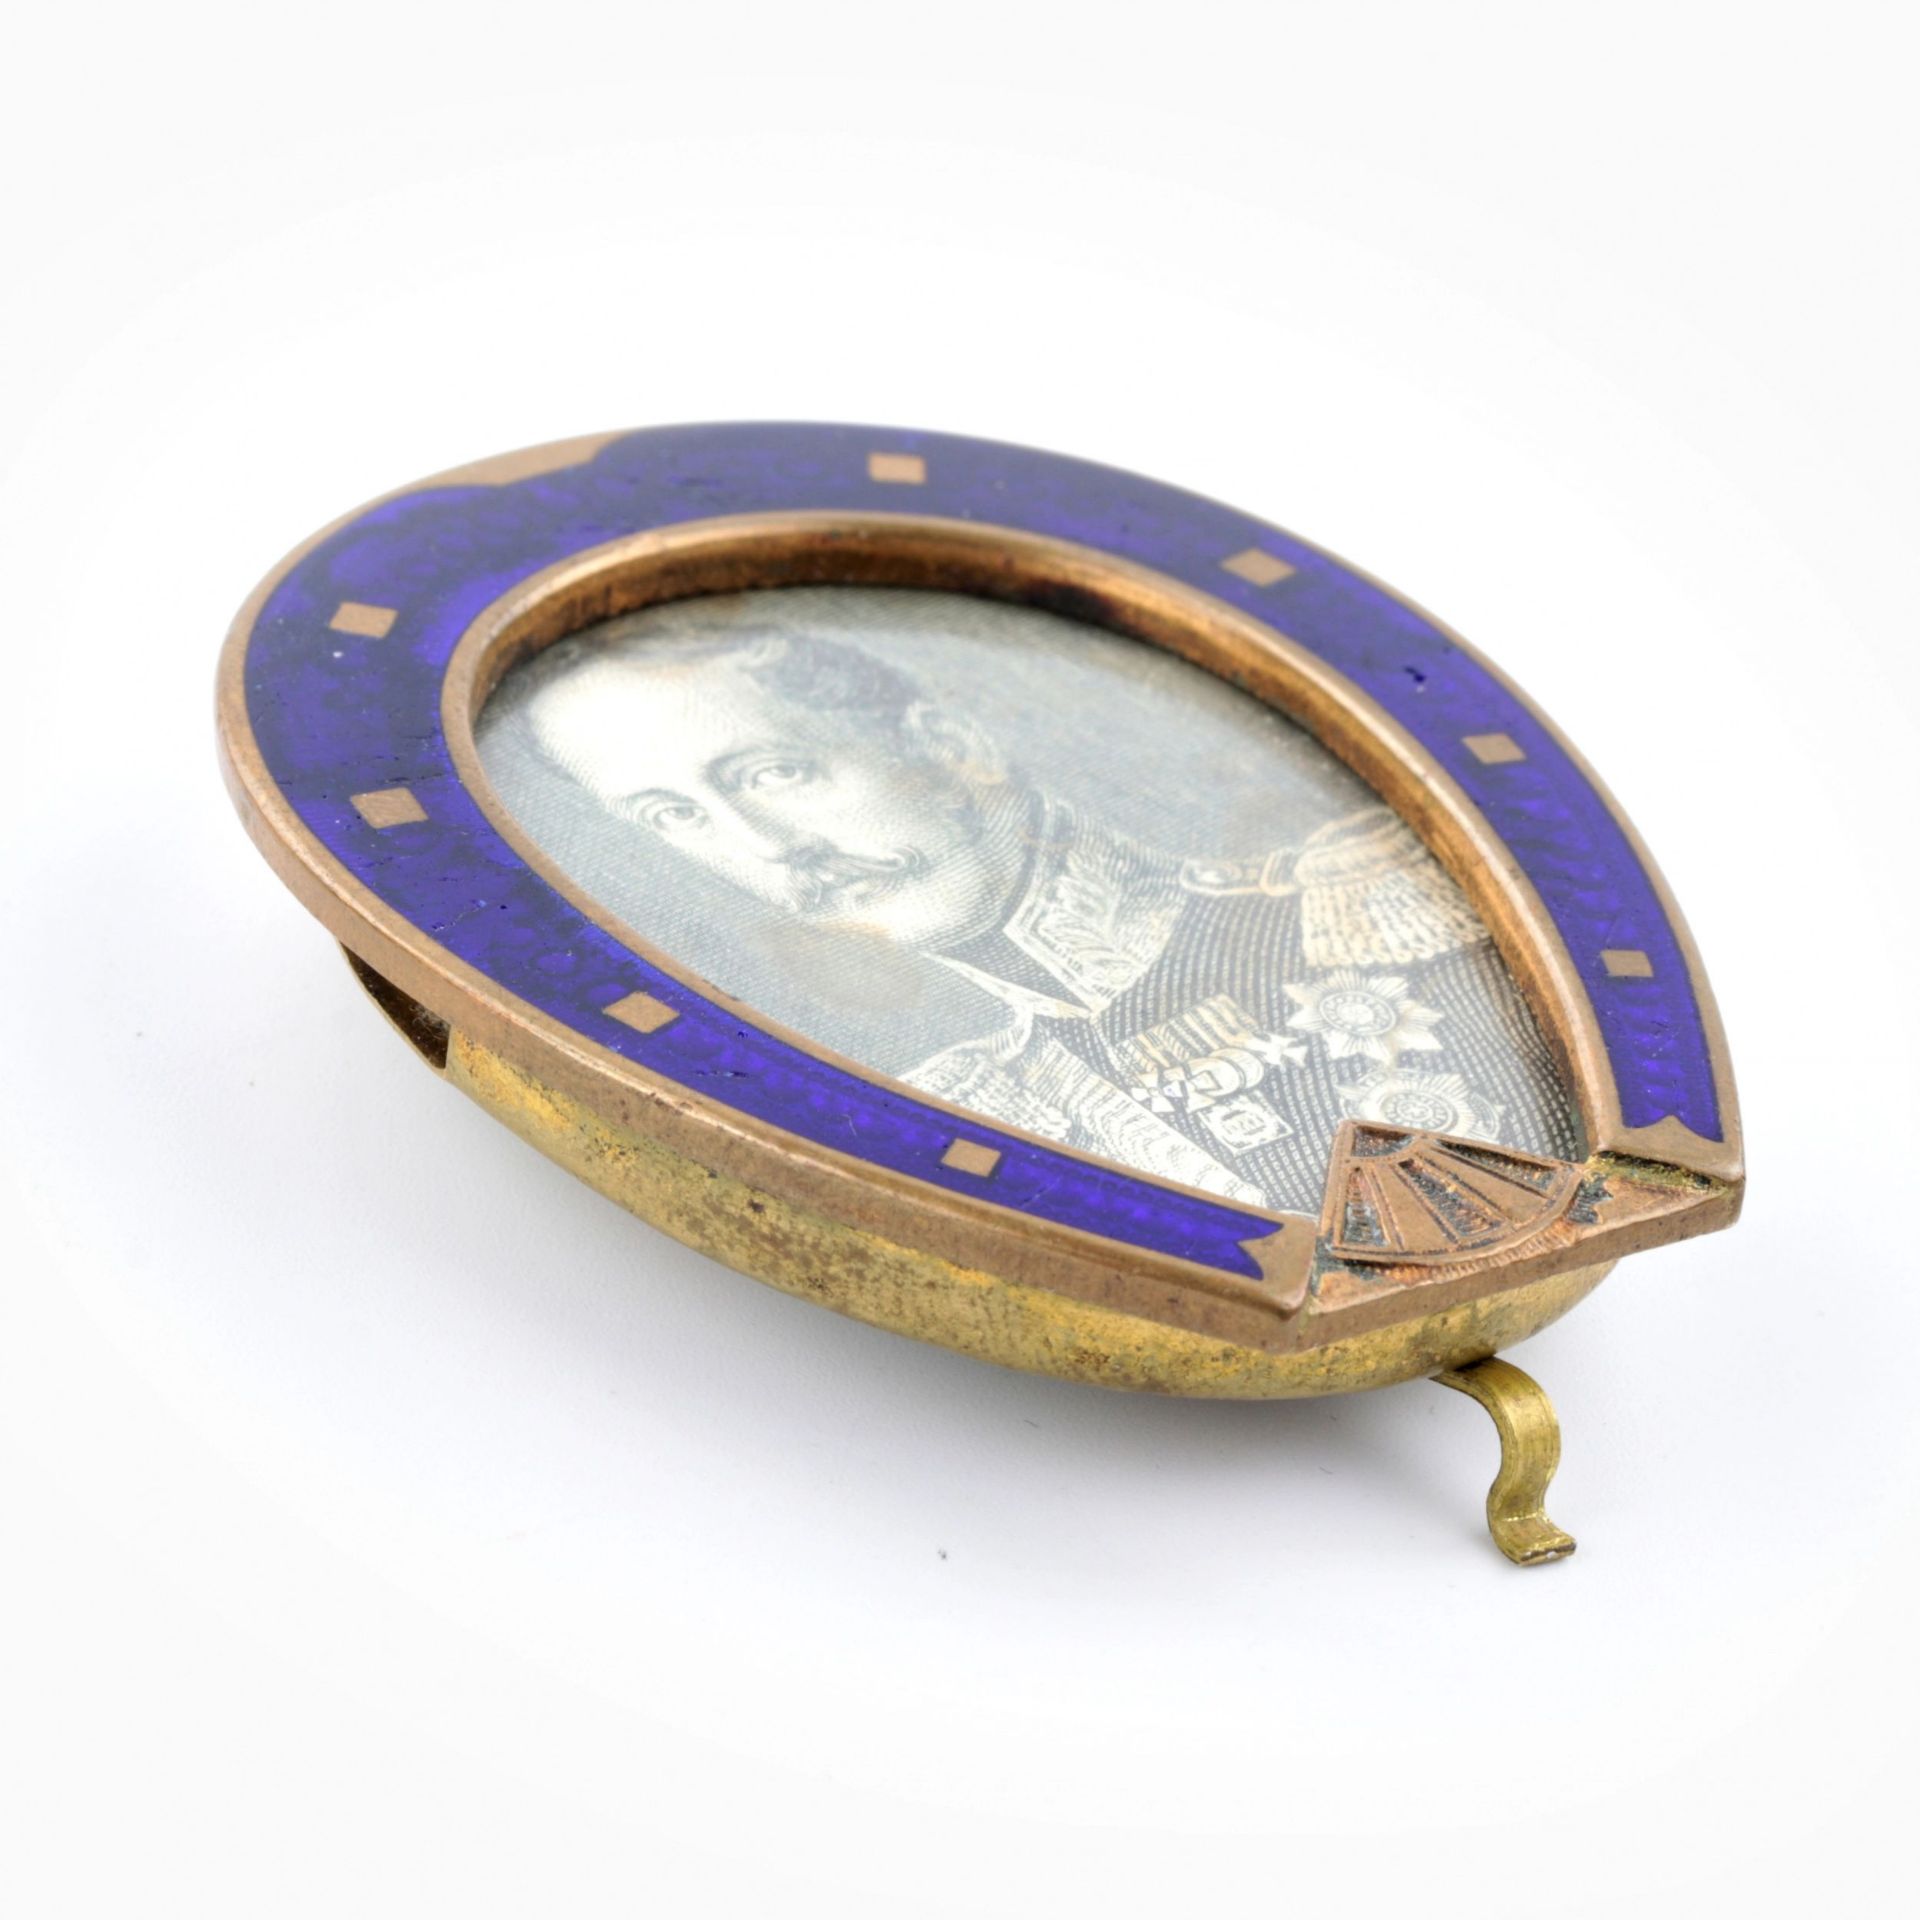 Photo frame in the shape of a horseshoe, with blue enamel from the late 19th century. - Image 3 of 4